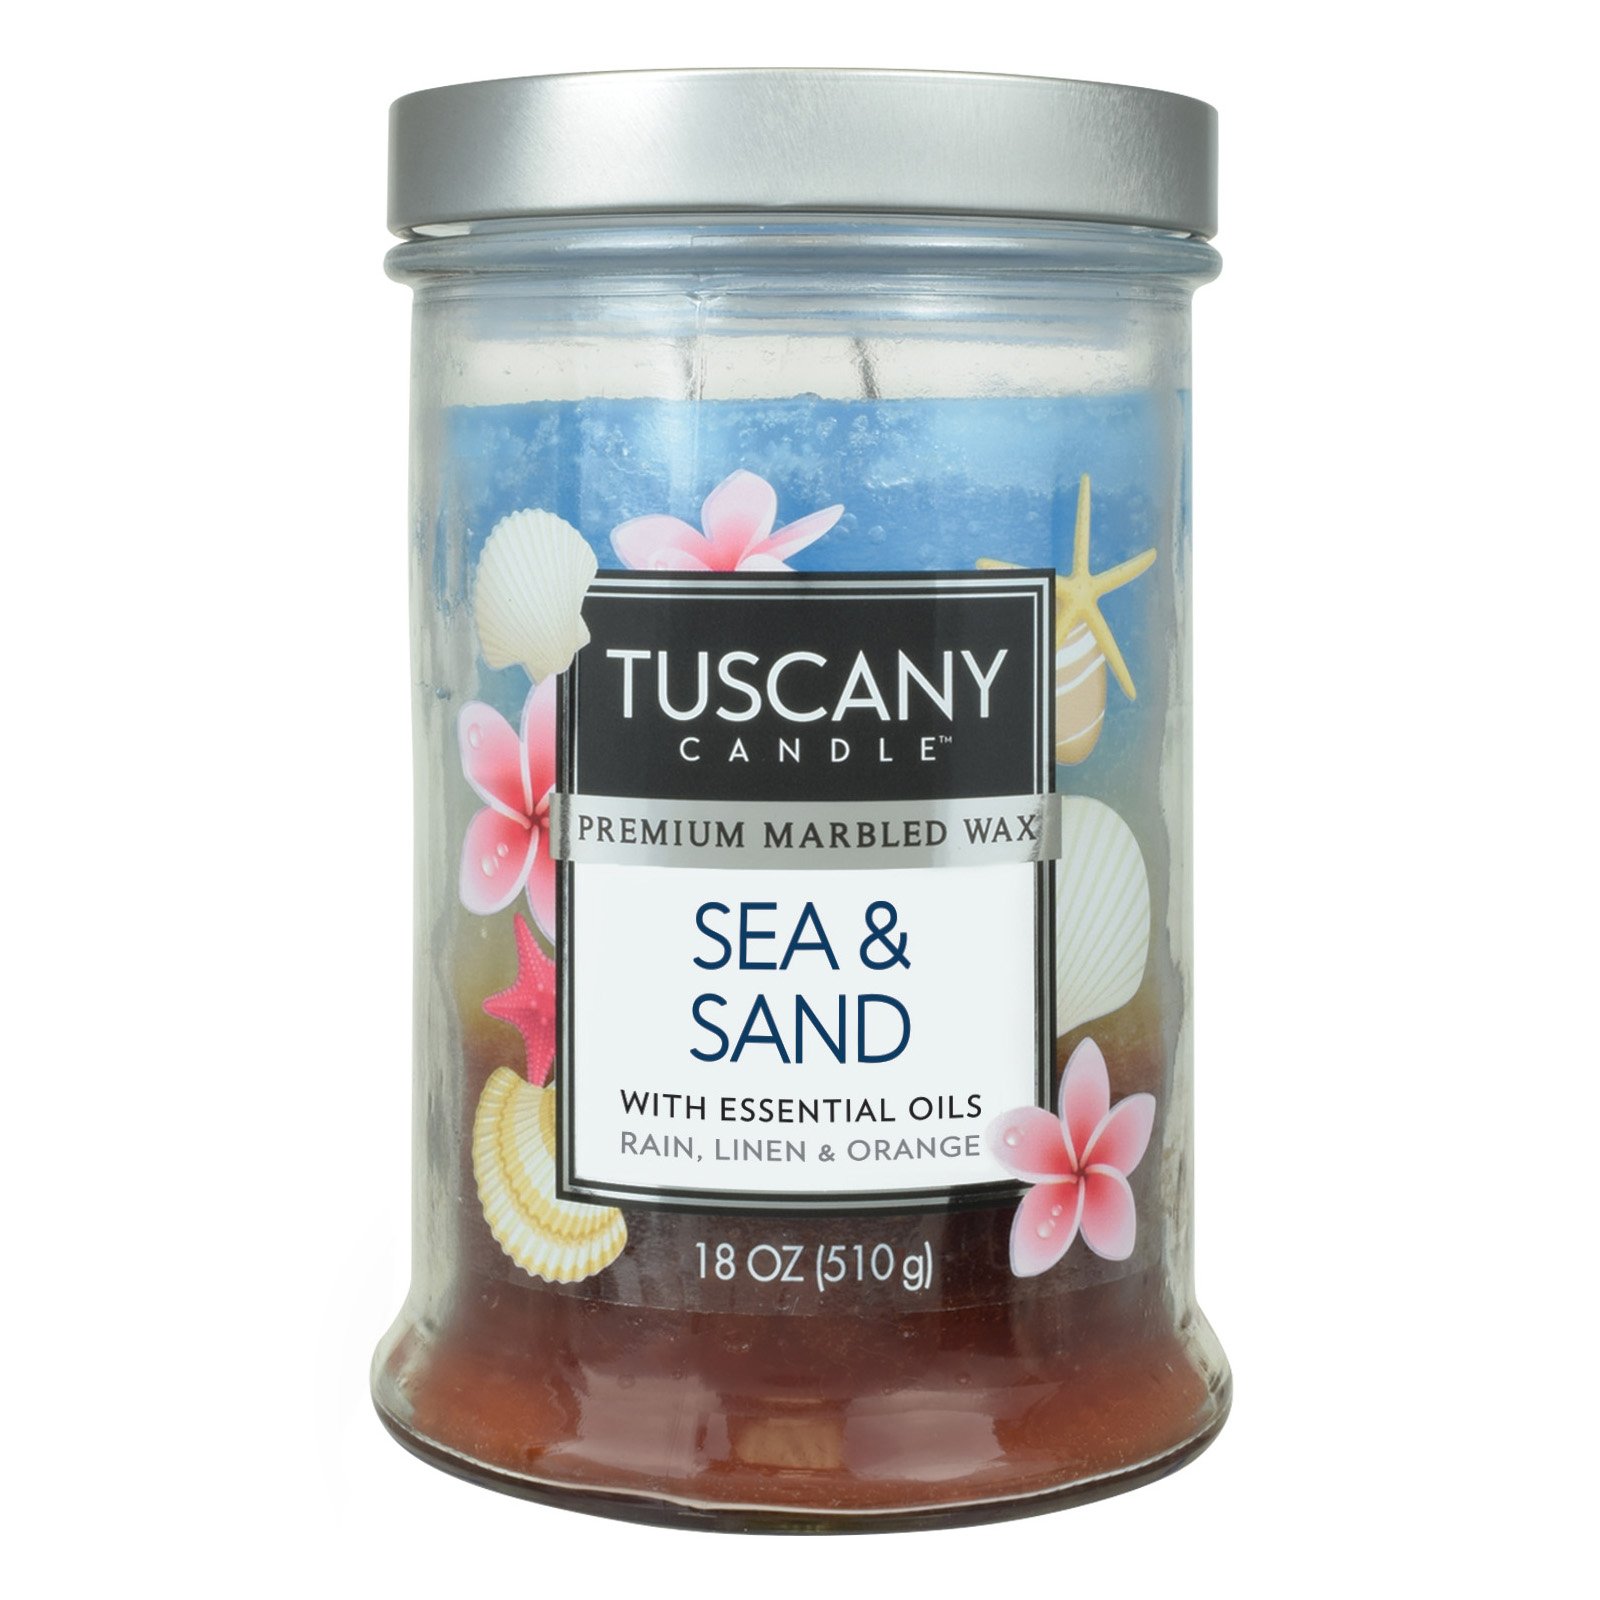 1 Tuscany Candle CREAMY COCONUT Premium Marbled Wax 2-Wick Tumbler Large 18 oz 